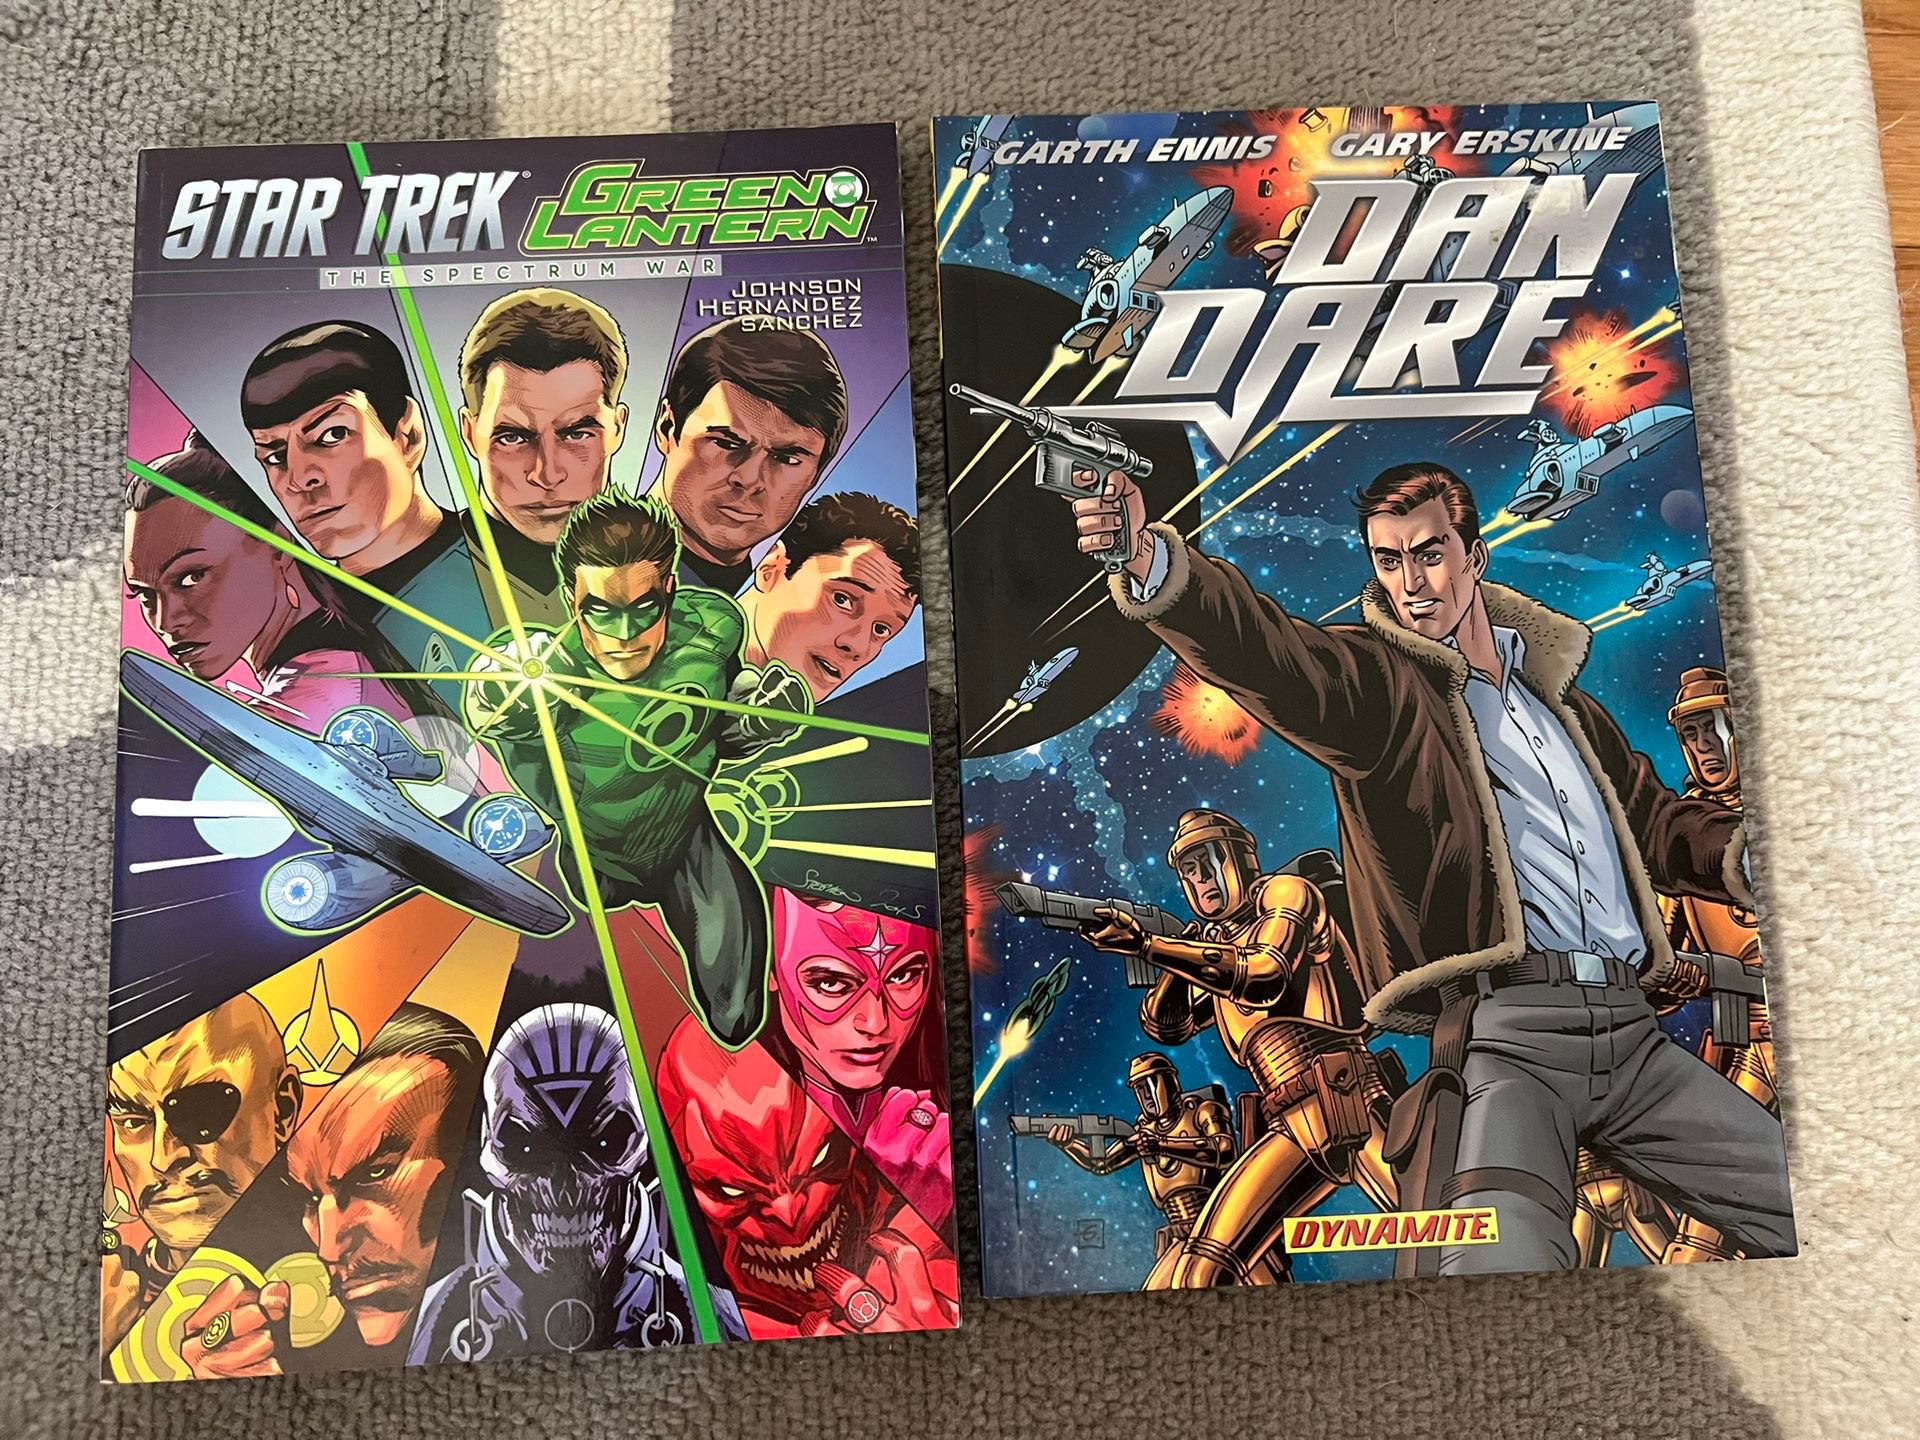 Dynamic Comics - Various Titles - Let Me Know If Interested In Any!